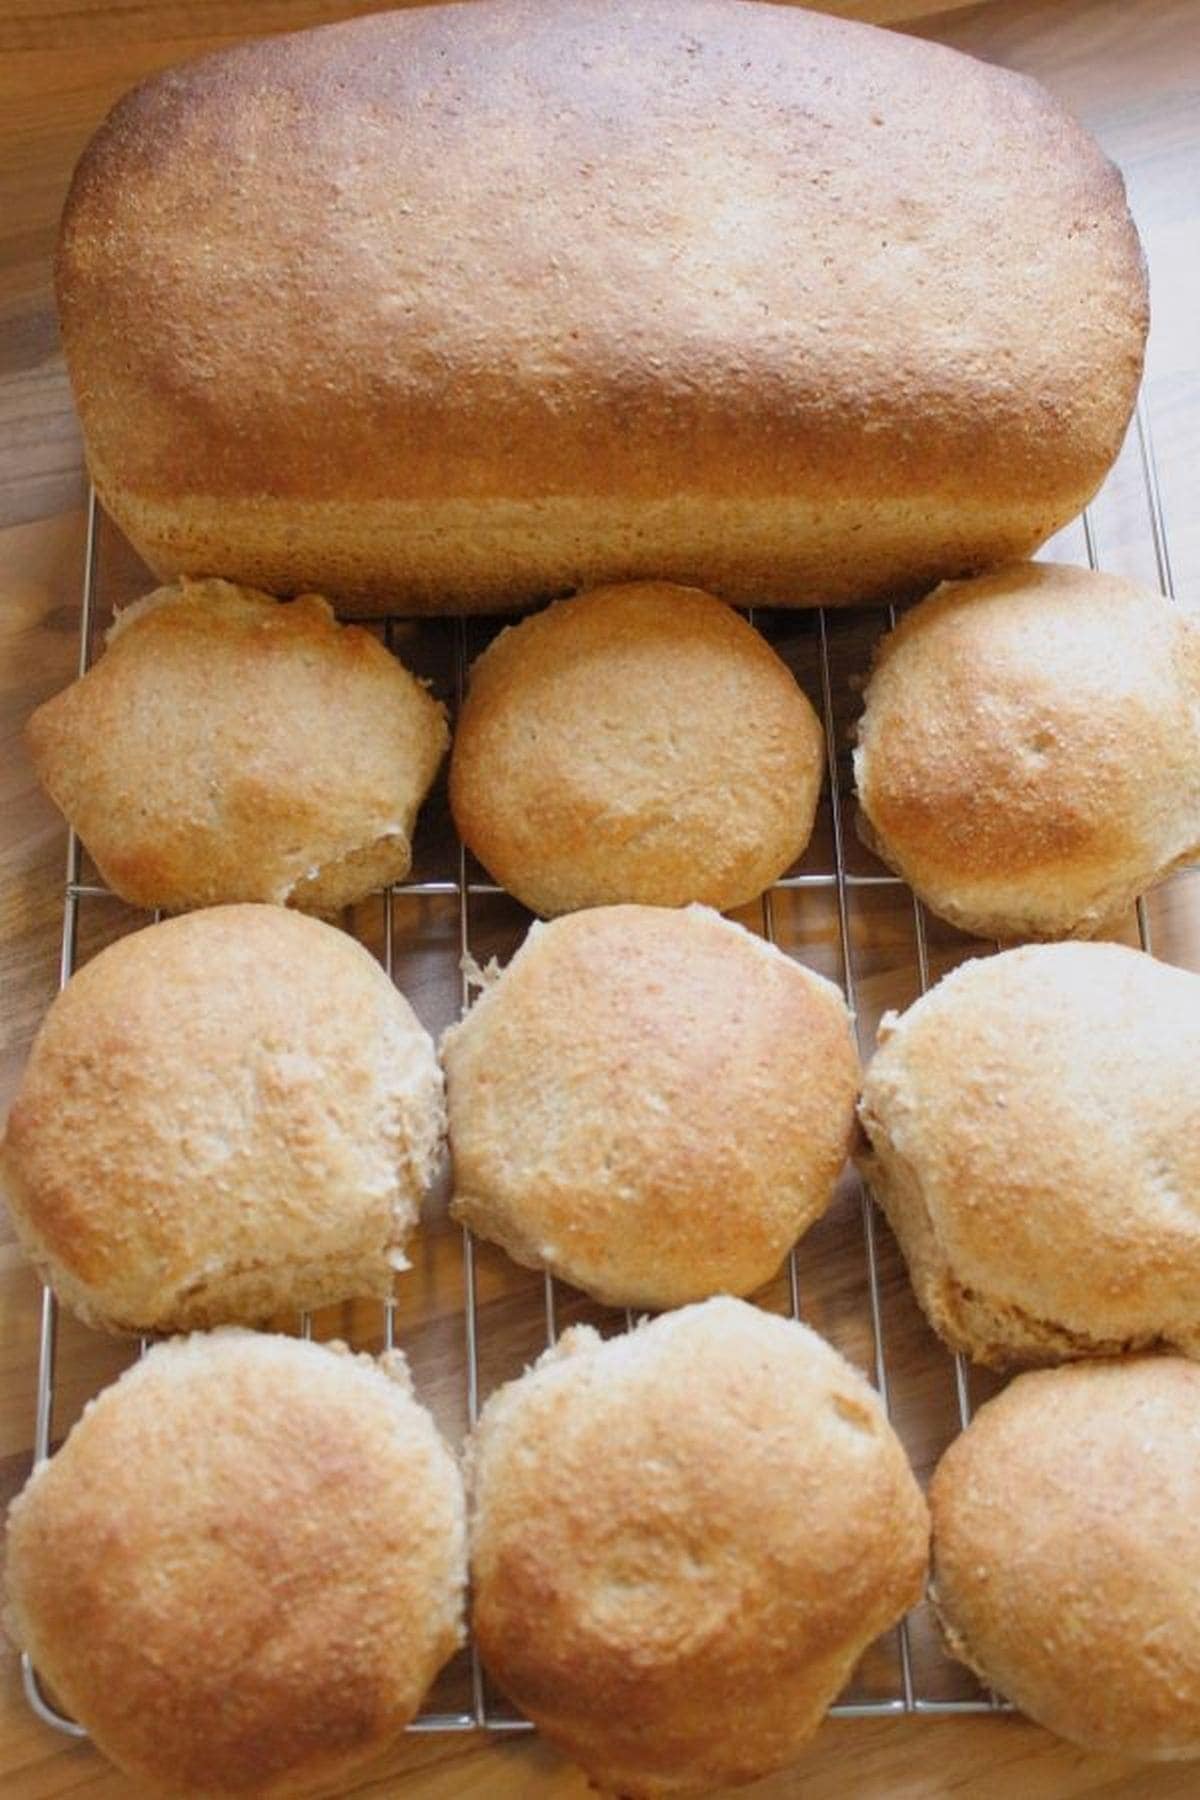 Birds eye view of 9 wholemeal rolls and a loaf of wholemeal bread on a baking rack.